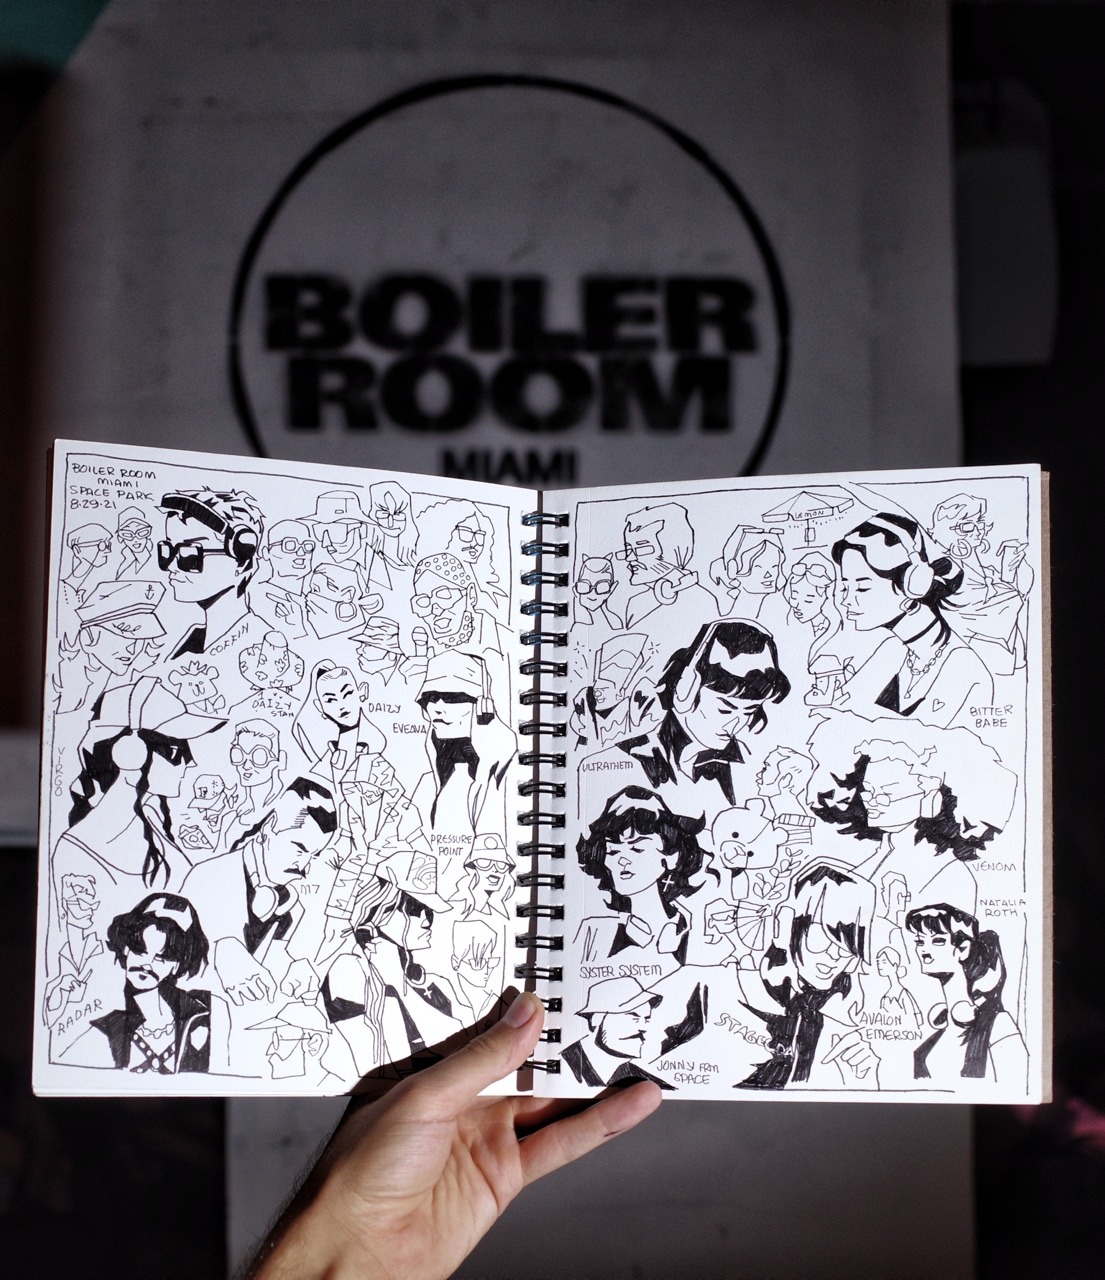 Boiler Room Miami illustrated by Brian Butler of Upperhandart as part of his larger @showdrawn series